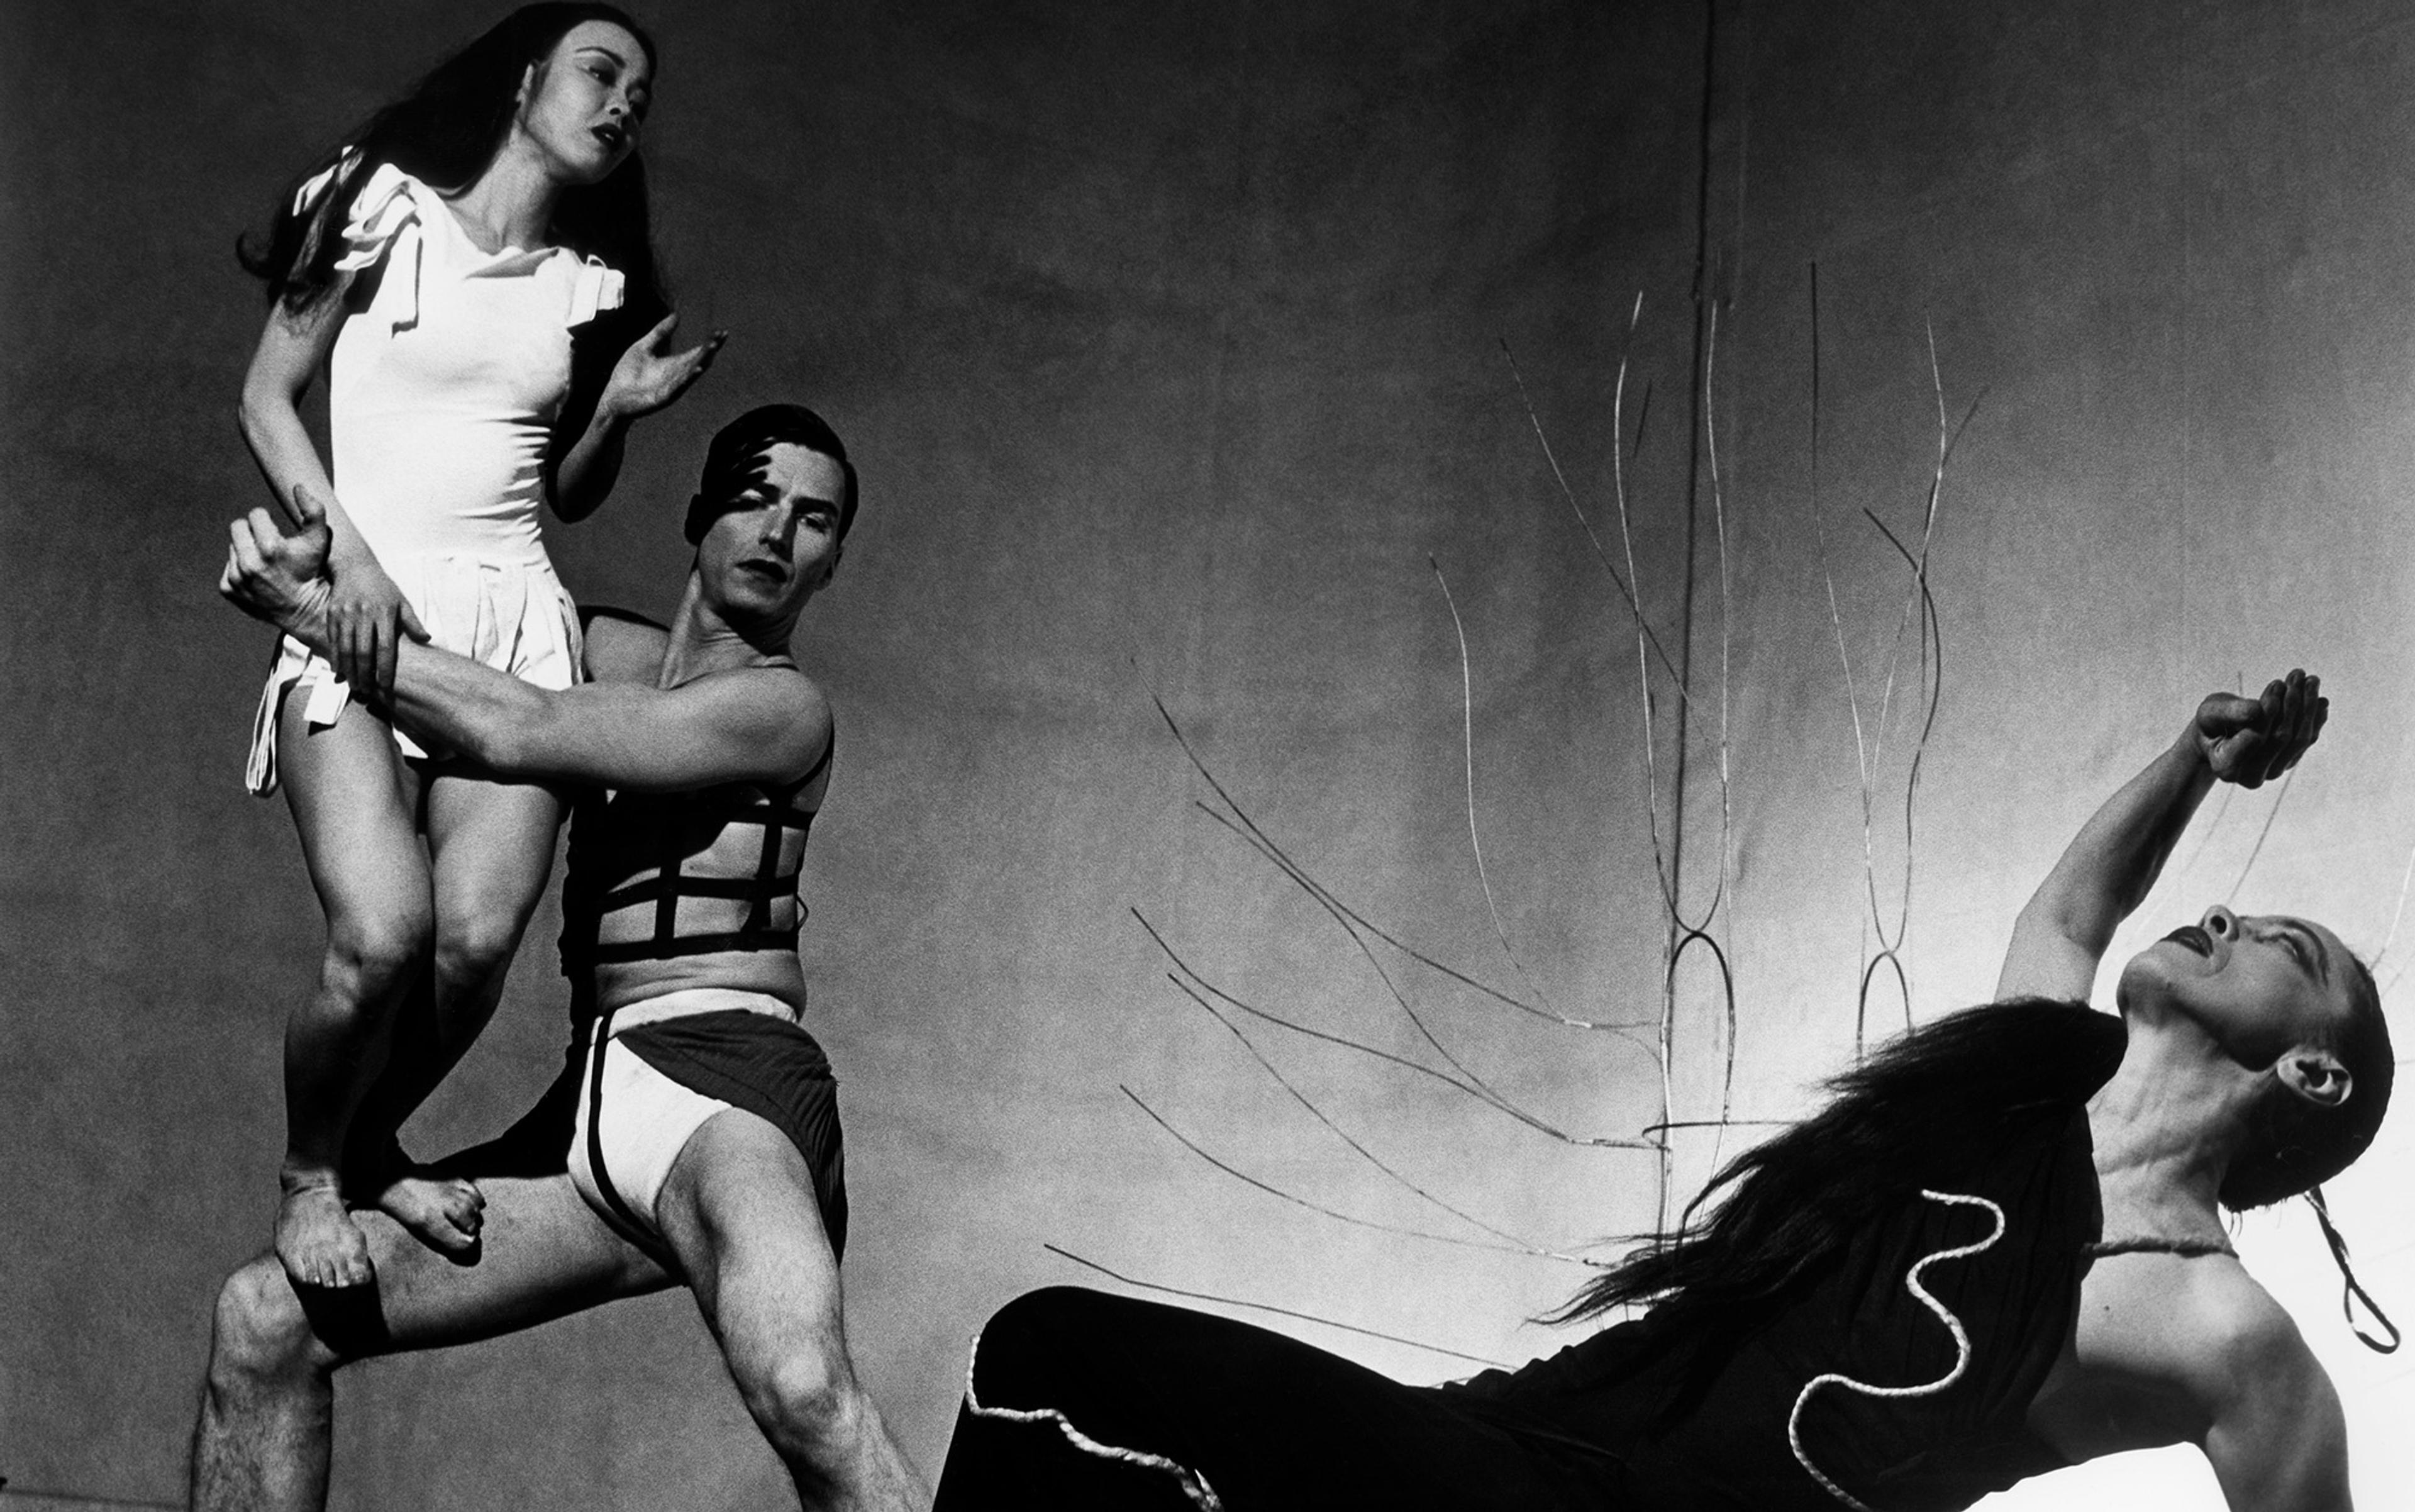 Black-and-white photo of three dancers in dynamic poses; one man lifting a woman in a dress while another woman in a black dress dramatically leans back.